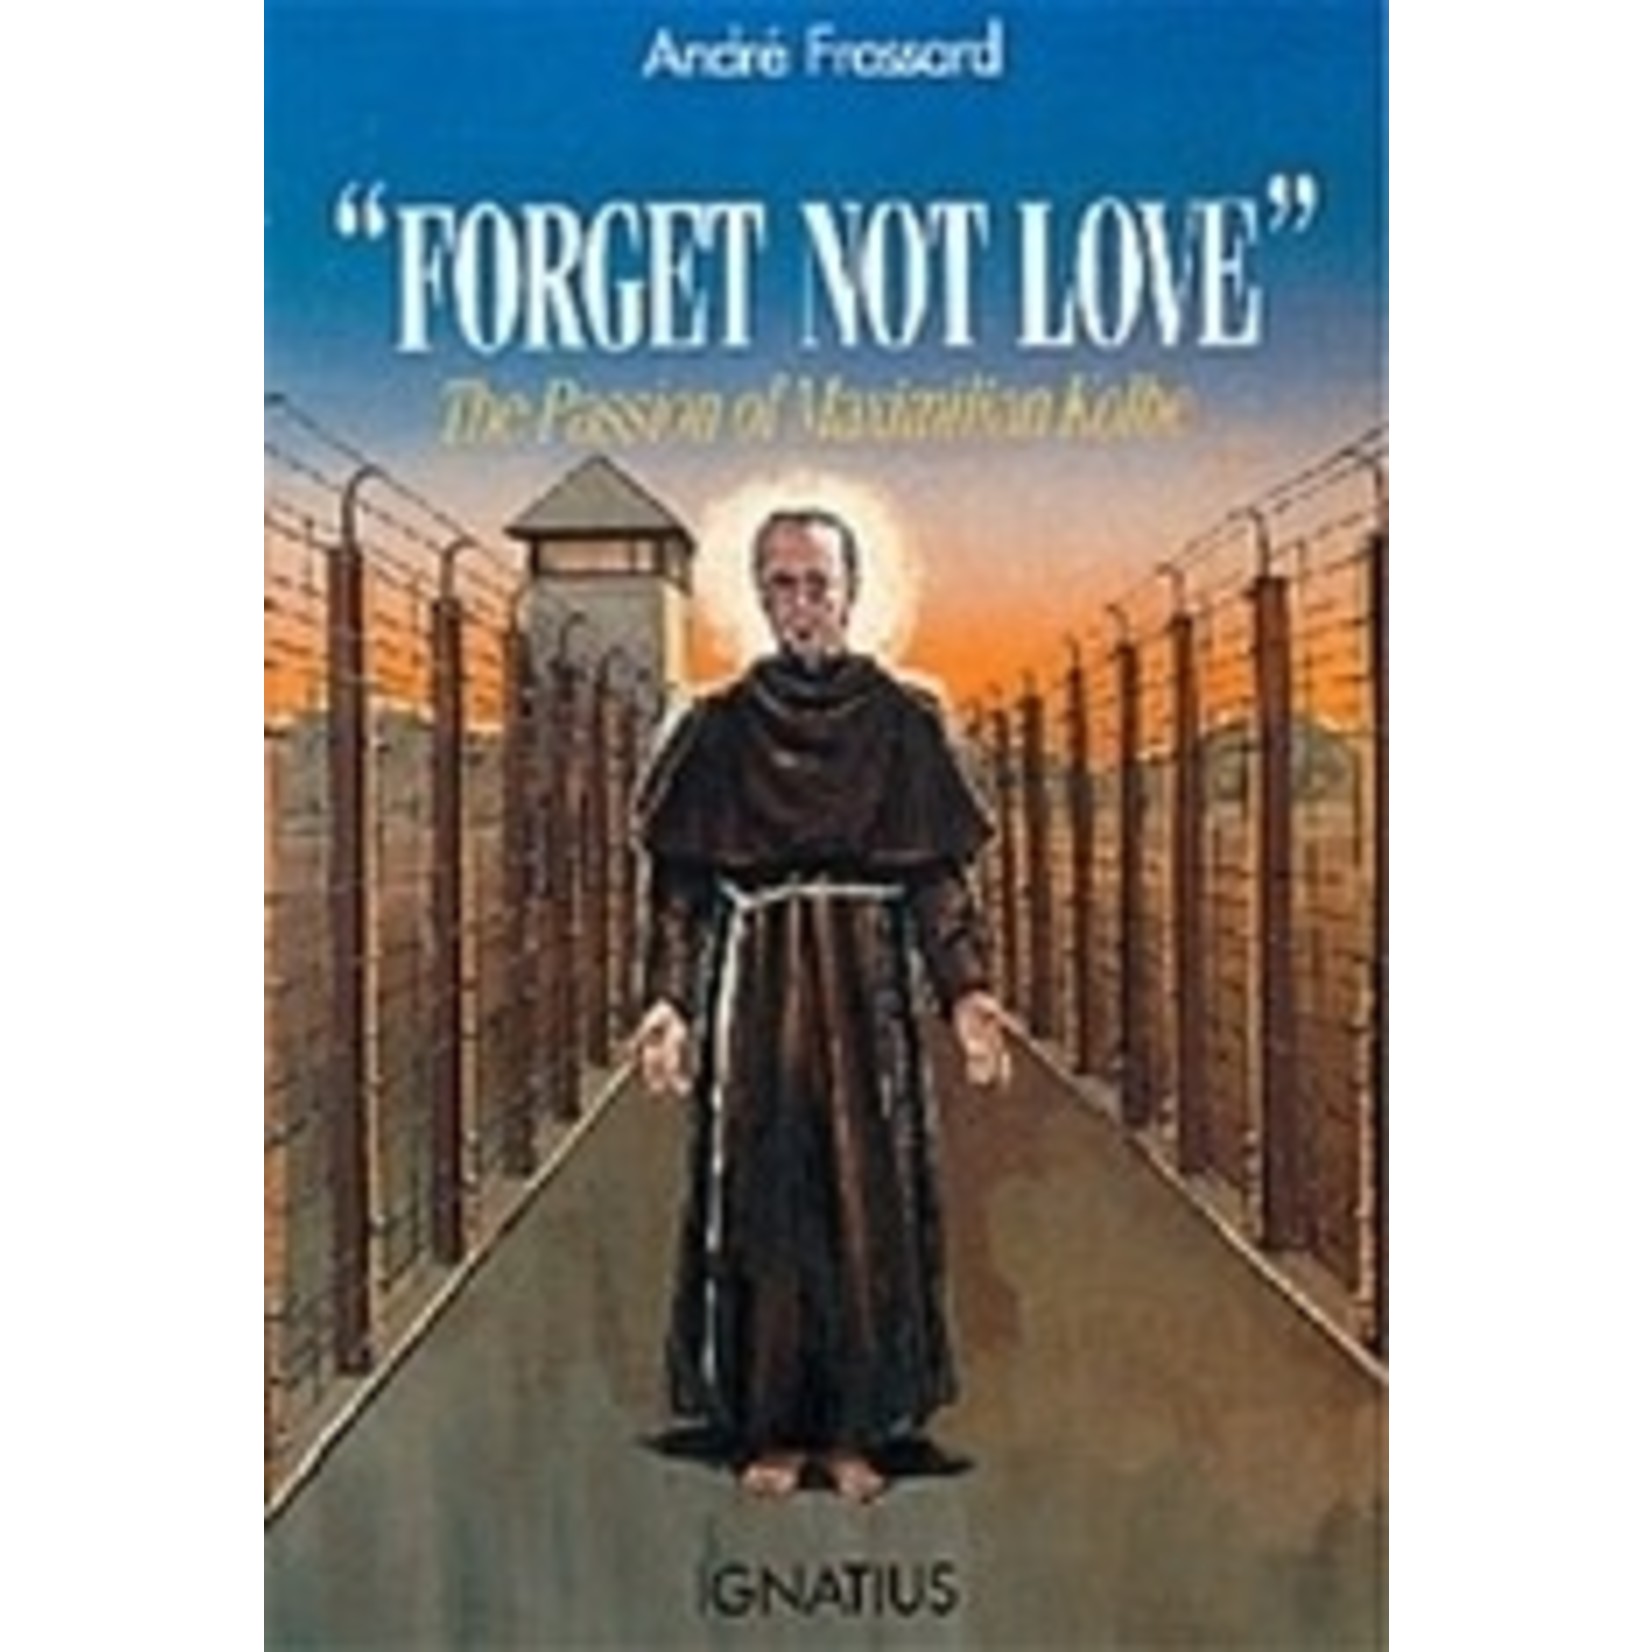 Forget Not Love